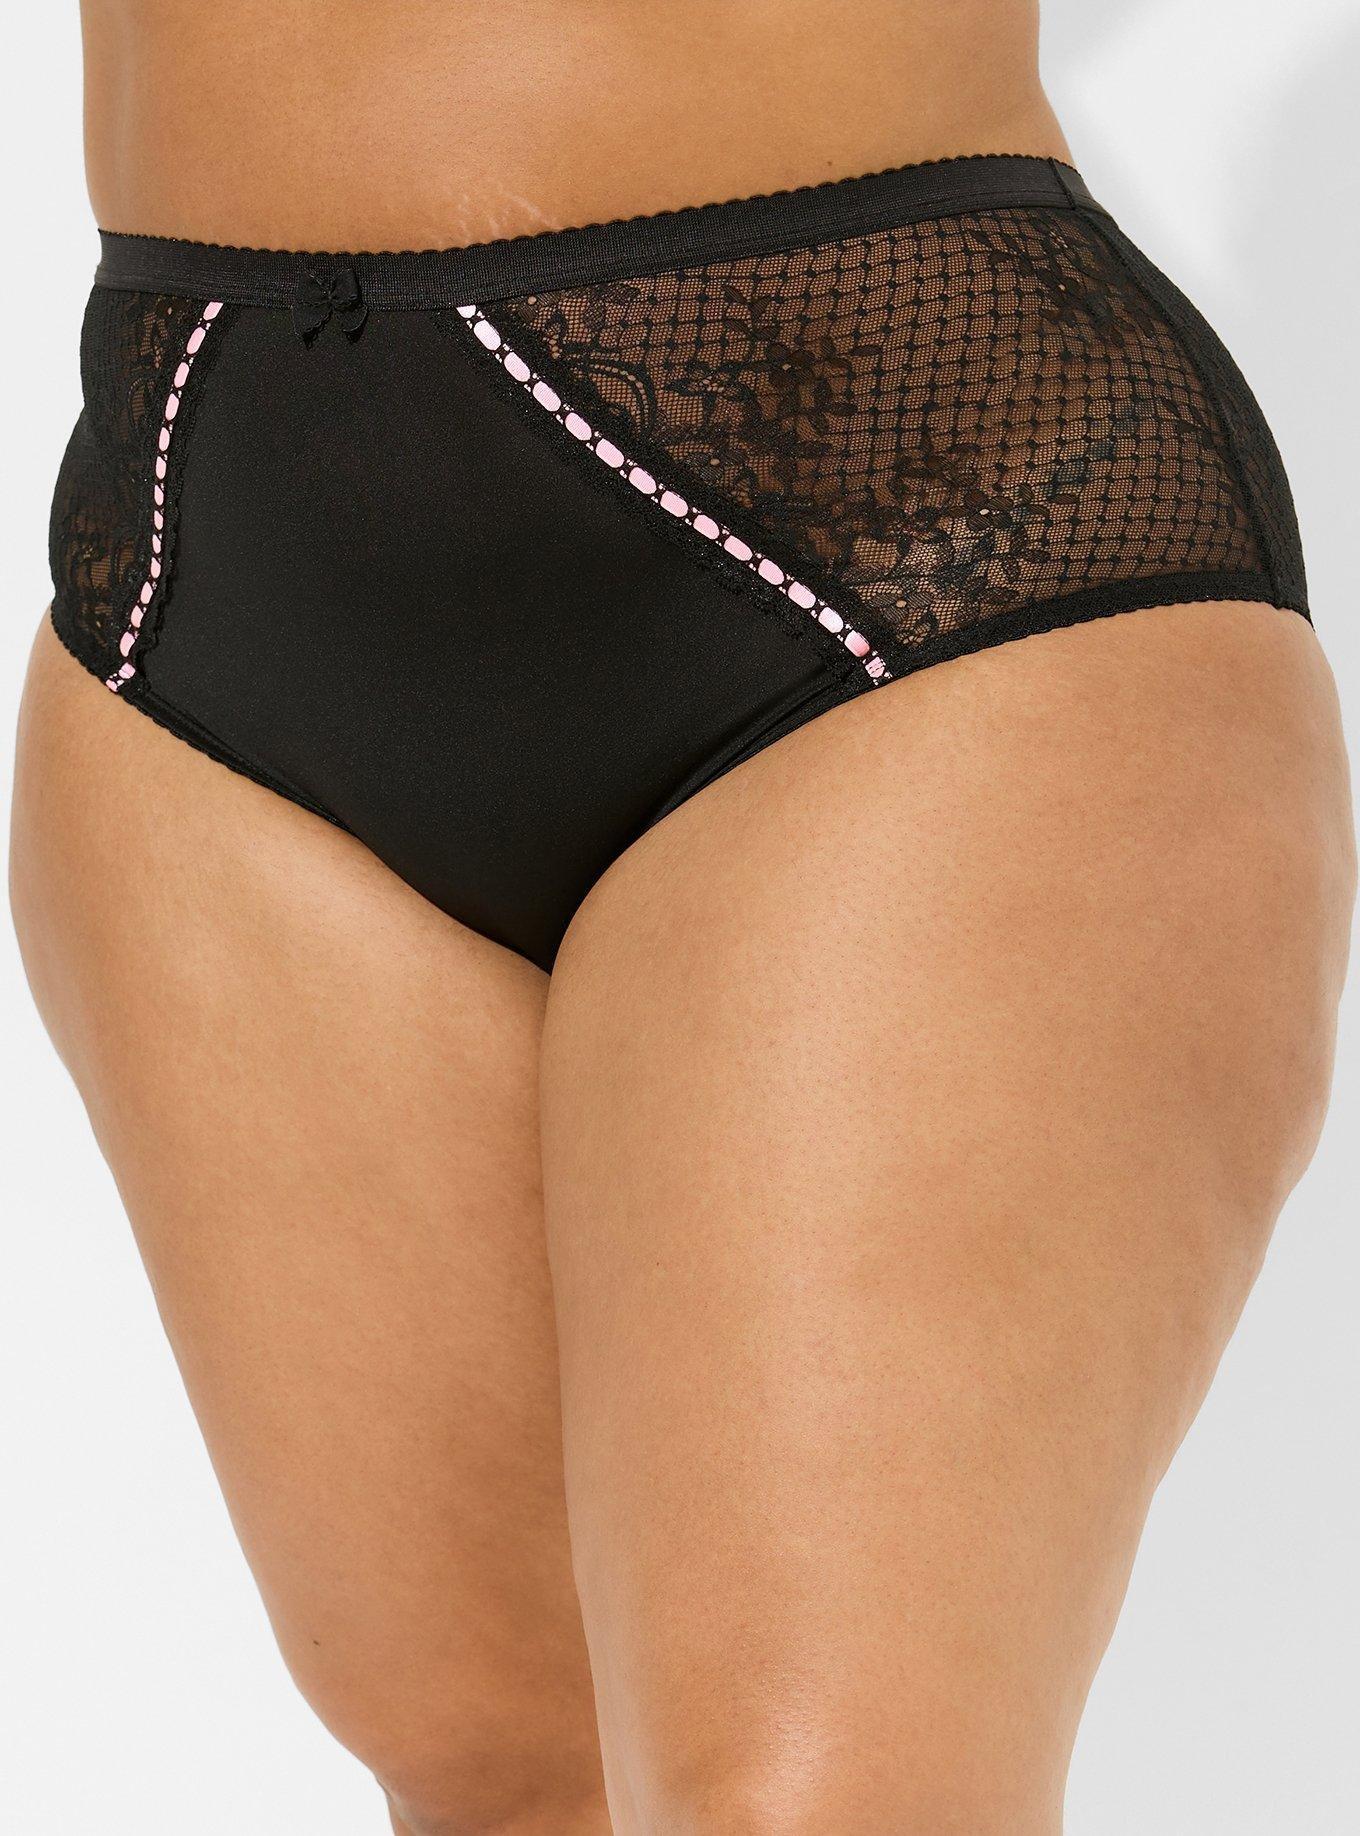 Plus Size - Retro Bombshell Lace High Waist Open Gusset Cheeky Panty -  Torrid